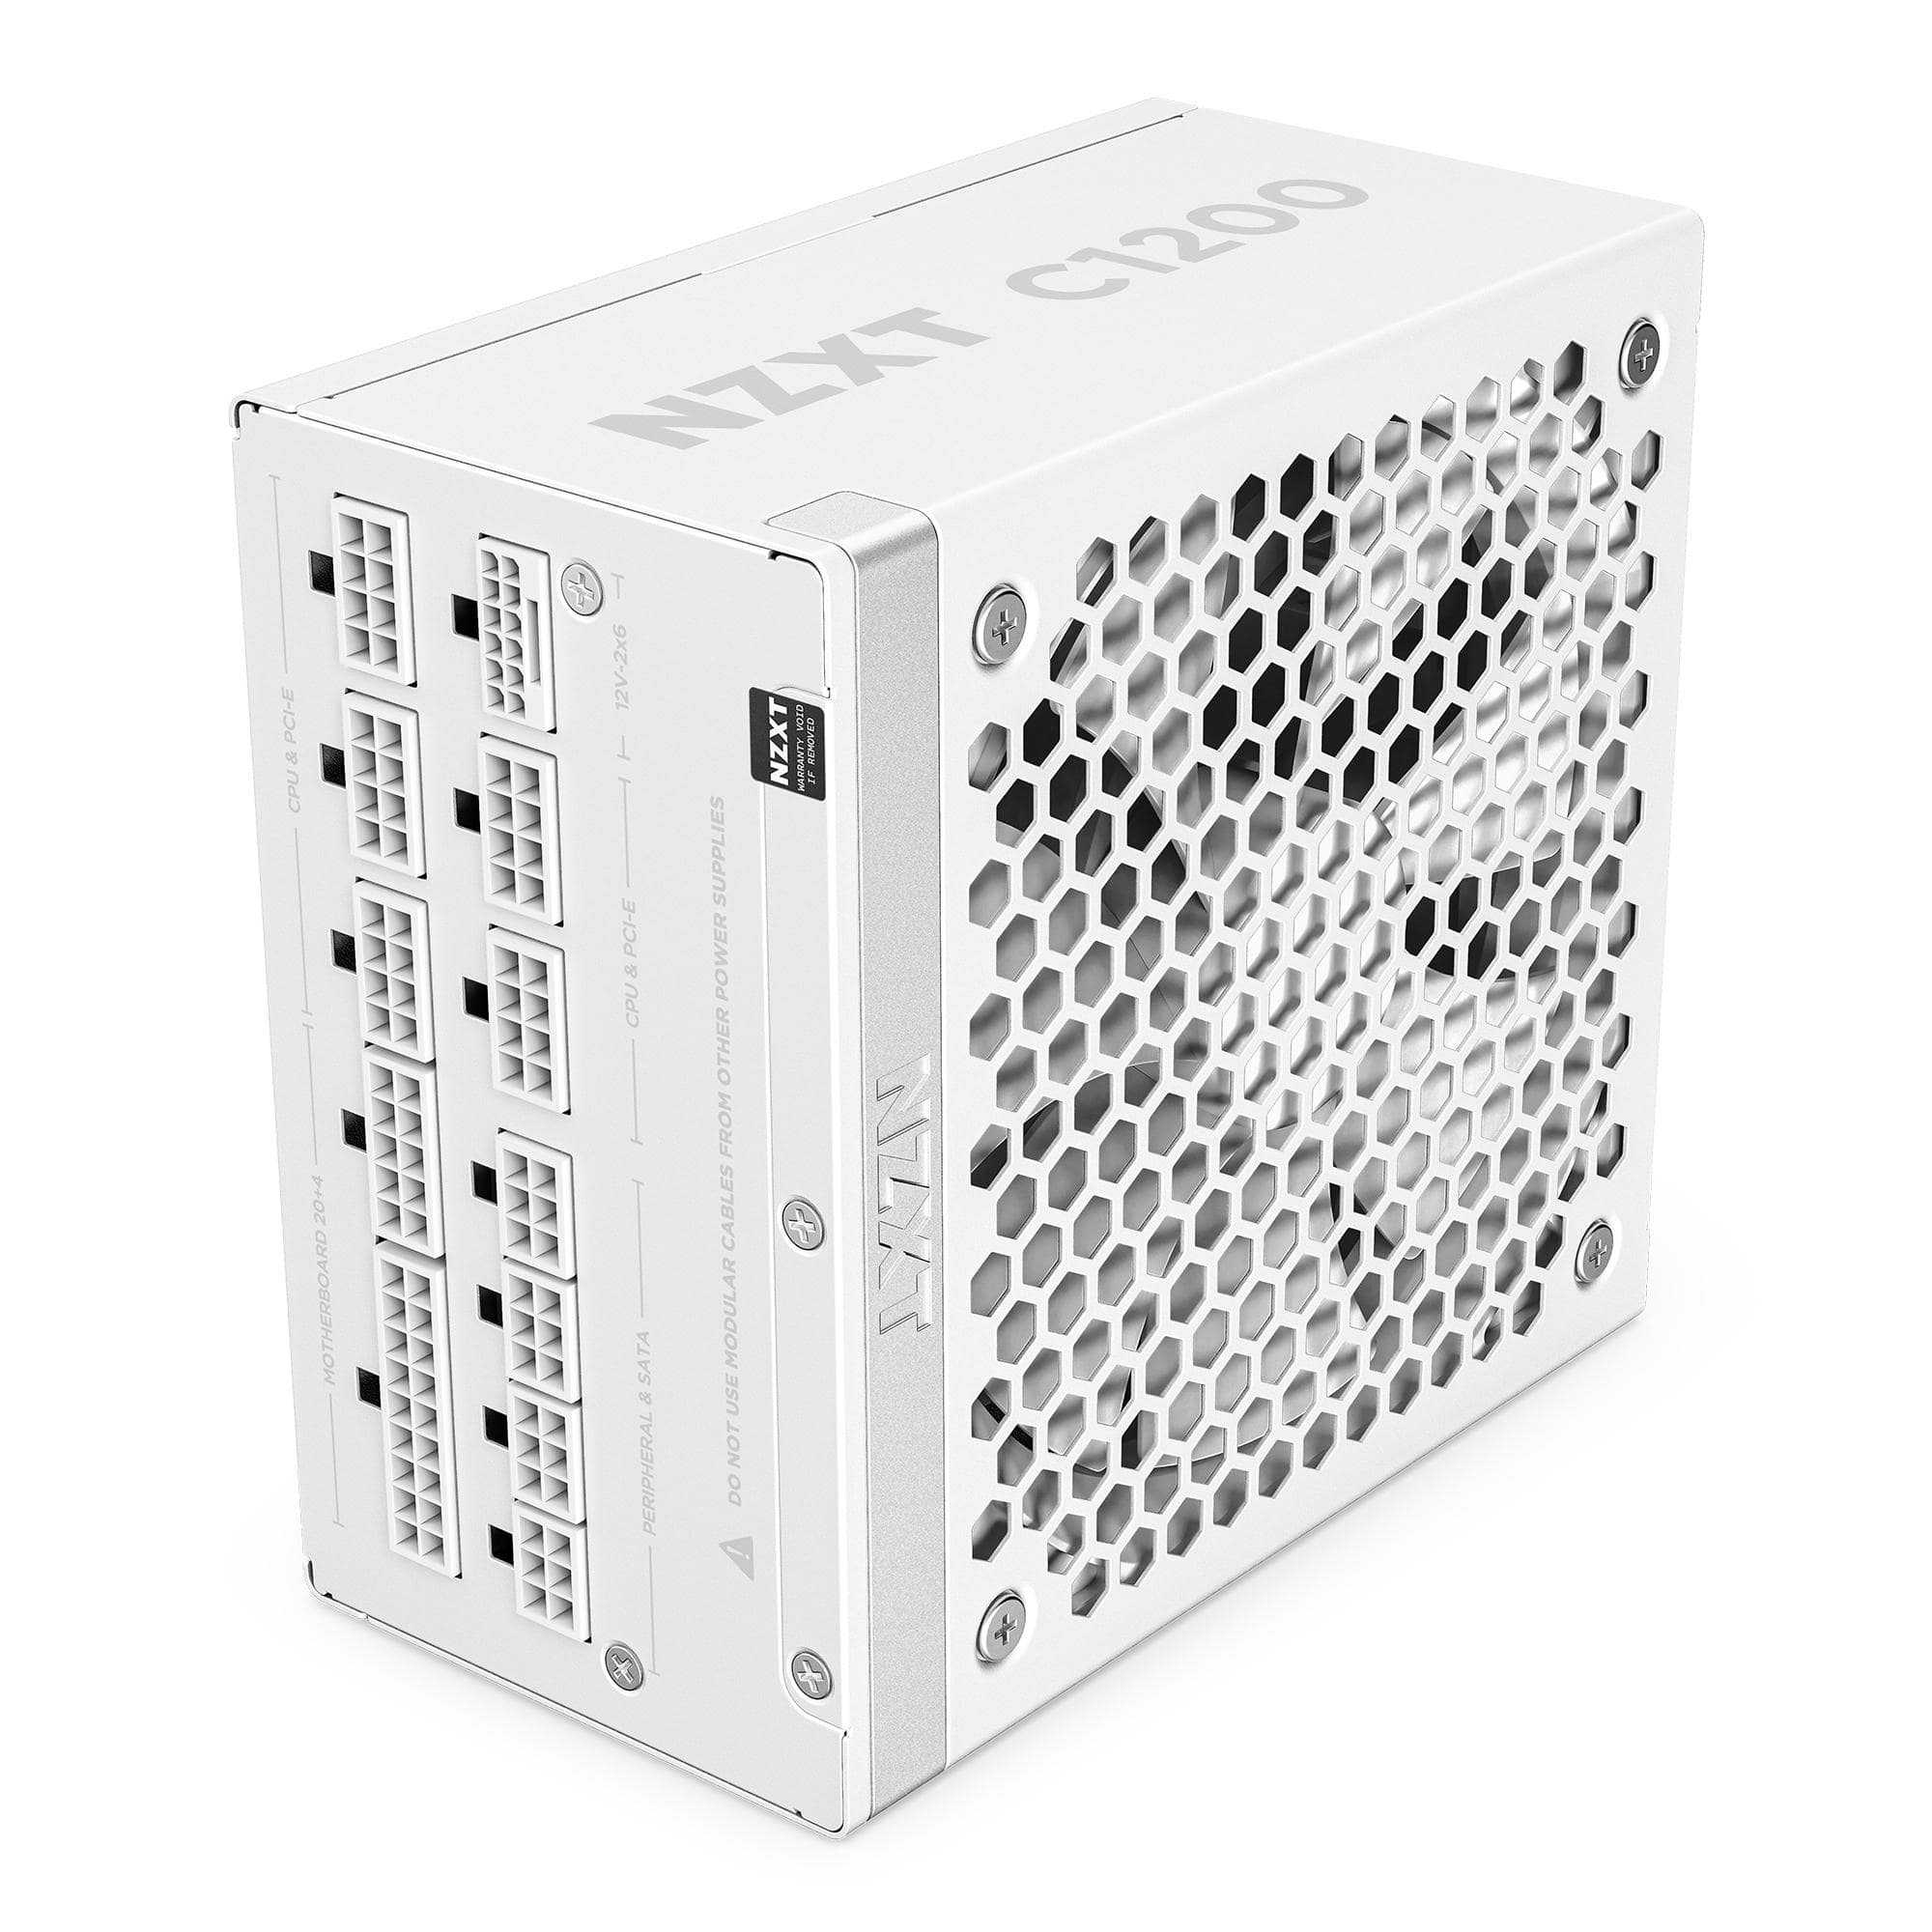 The NZXT C-series 80 Plus Gold power supply unit in white.